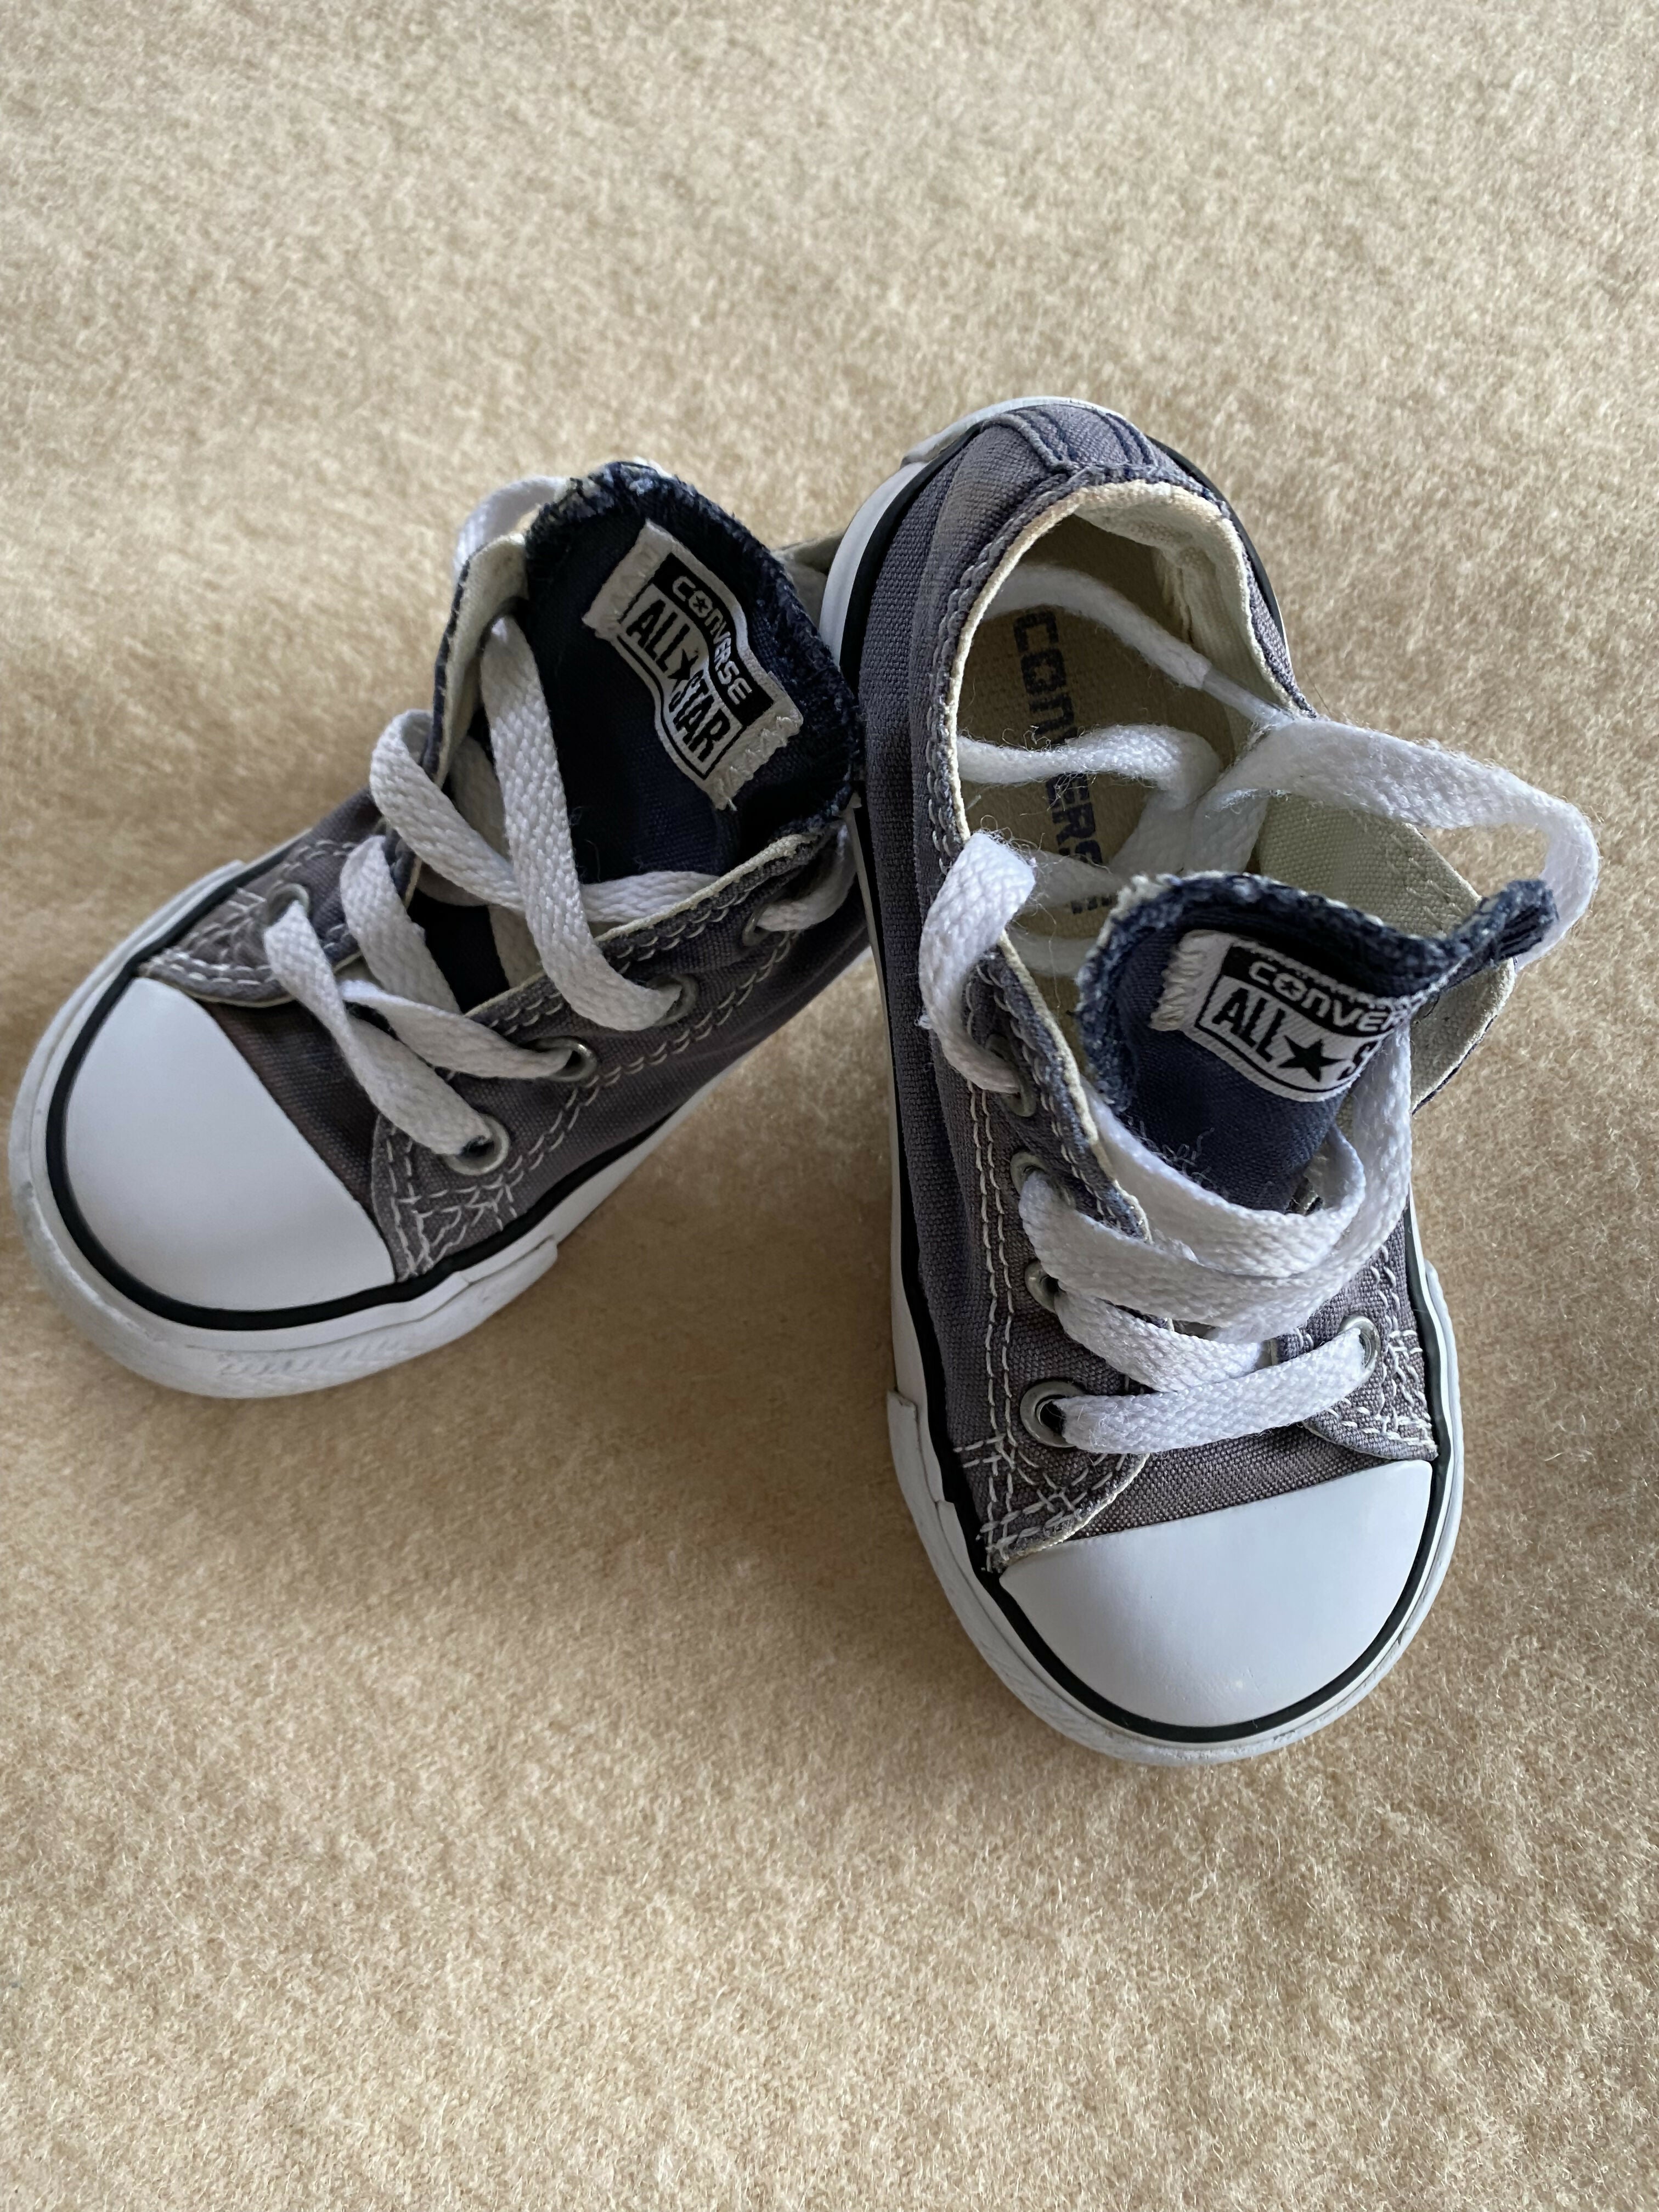 Converse Toddler Shoes (US7)